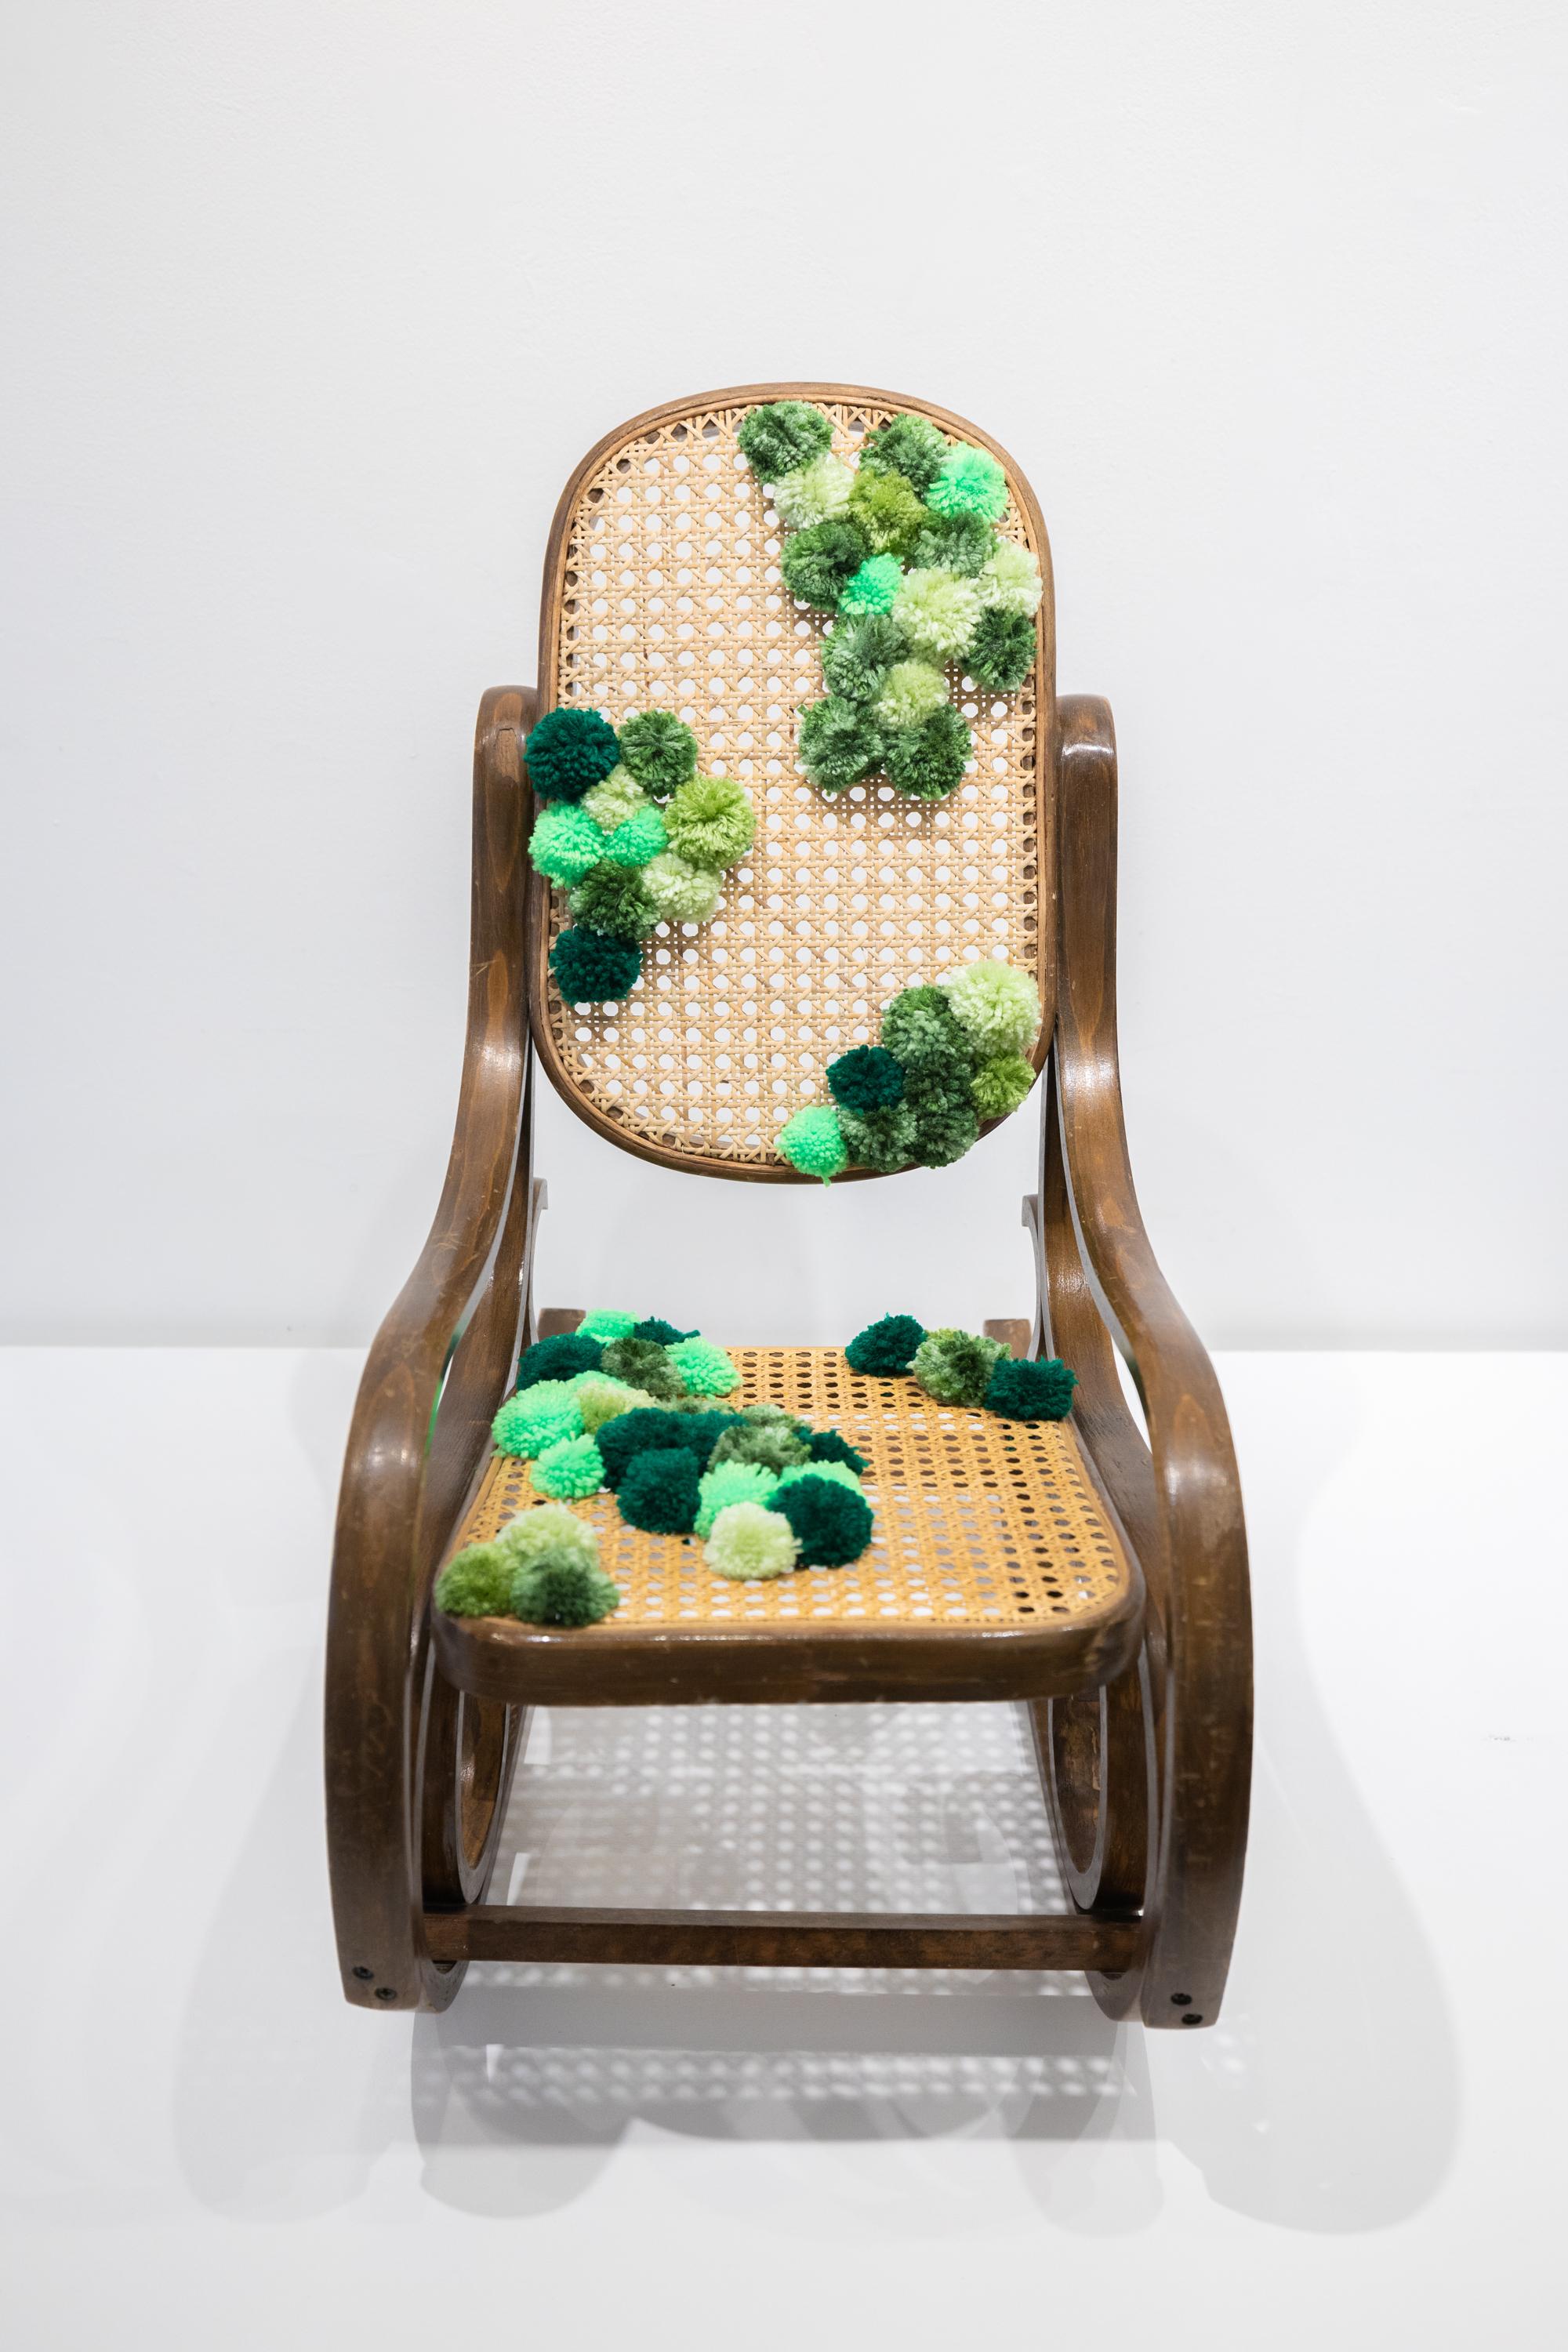 artist’s childhood chair, yarn

Watching her own children experience childhood in a global pandemic, Detweiler has found catharsis and joy in recalling her own experiences as a child of the 80s and a teen of the 90s, during what seemed like a